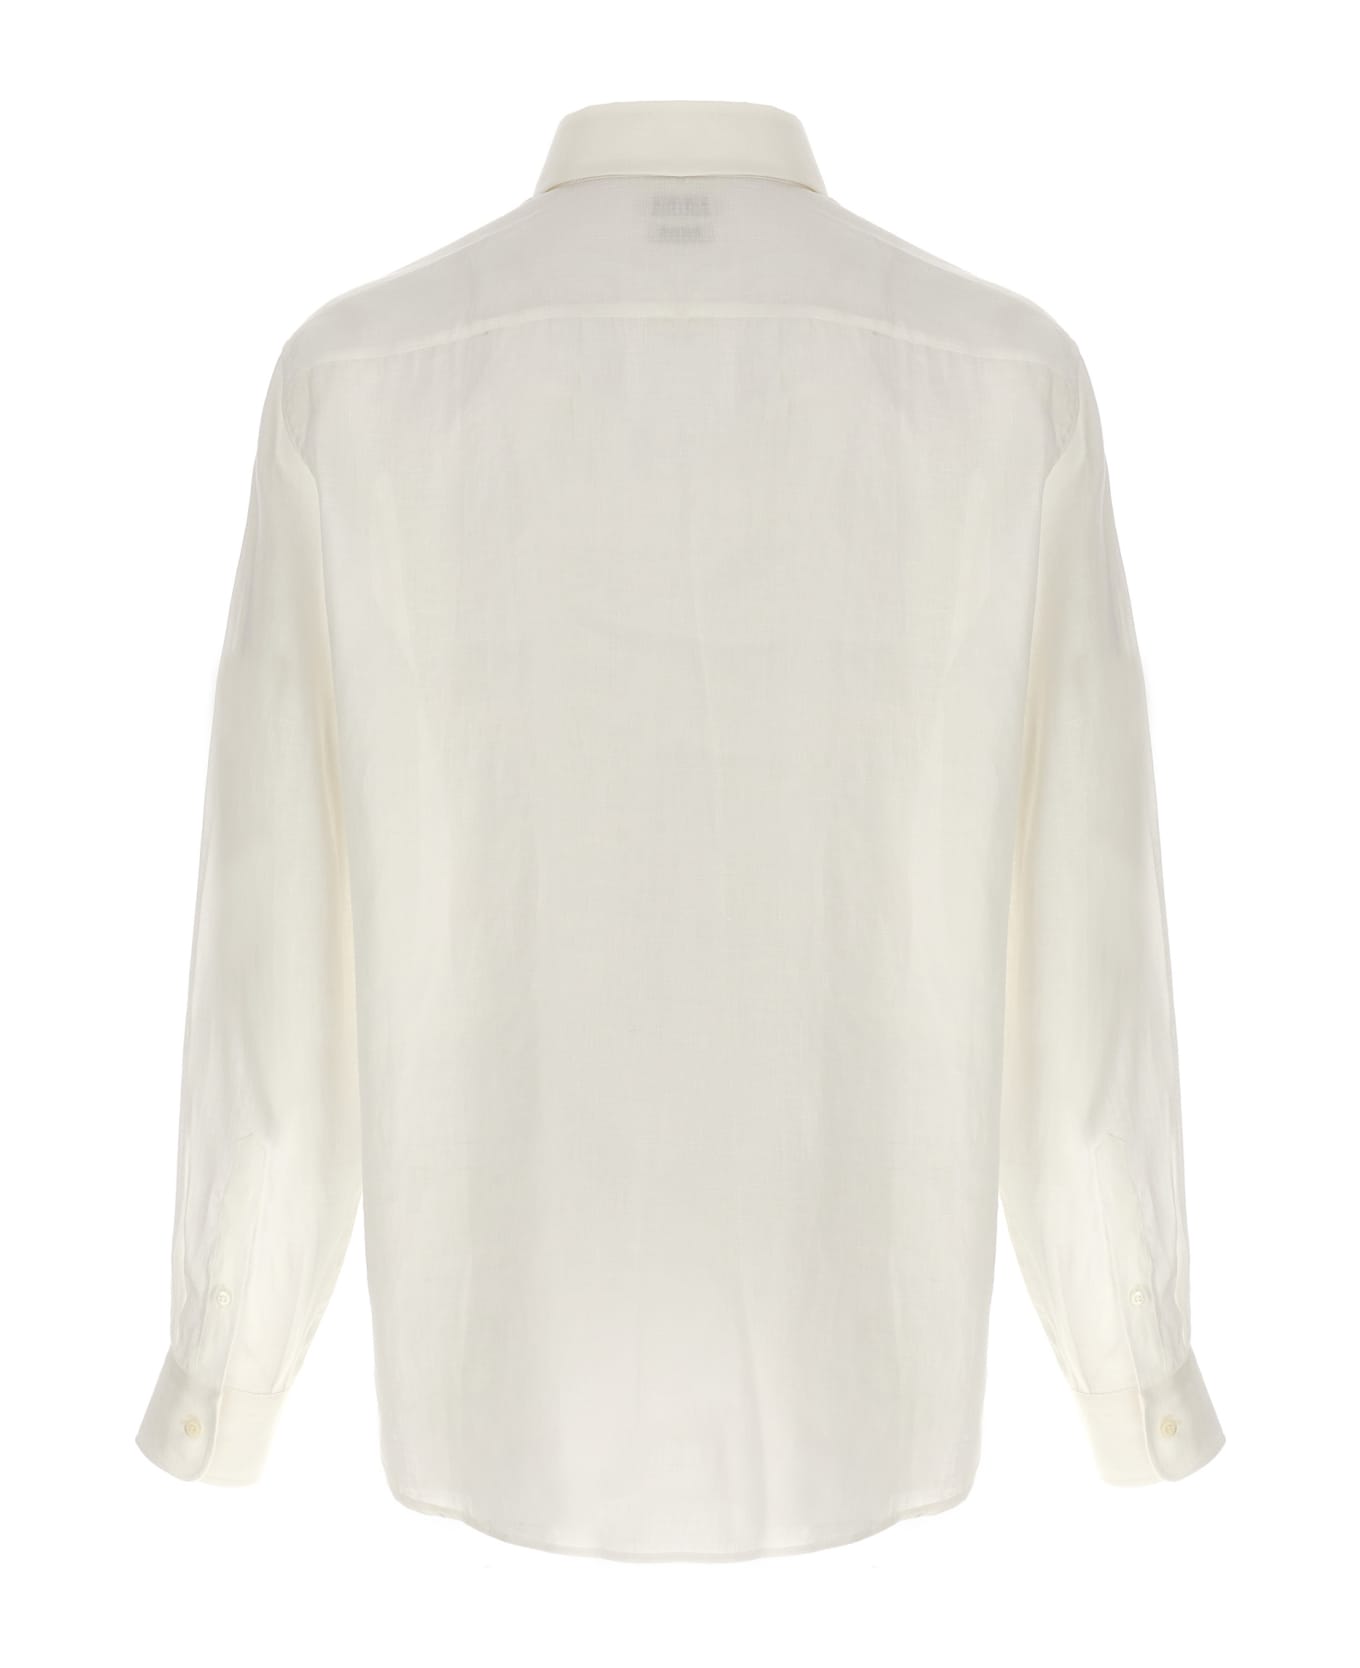 Brunello Cucinelli Long-sleeved Buttoned-up Shirt - White シャツ